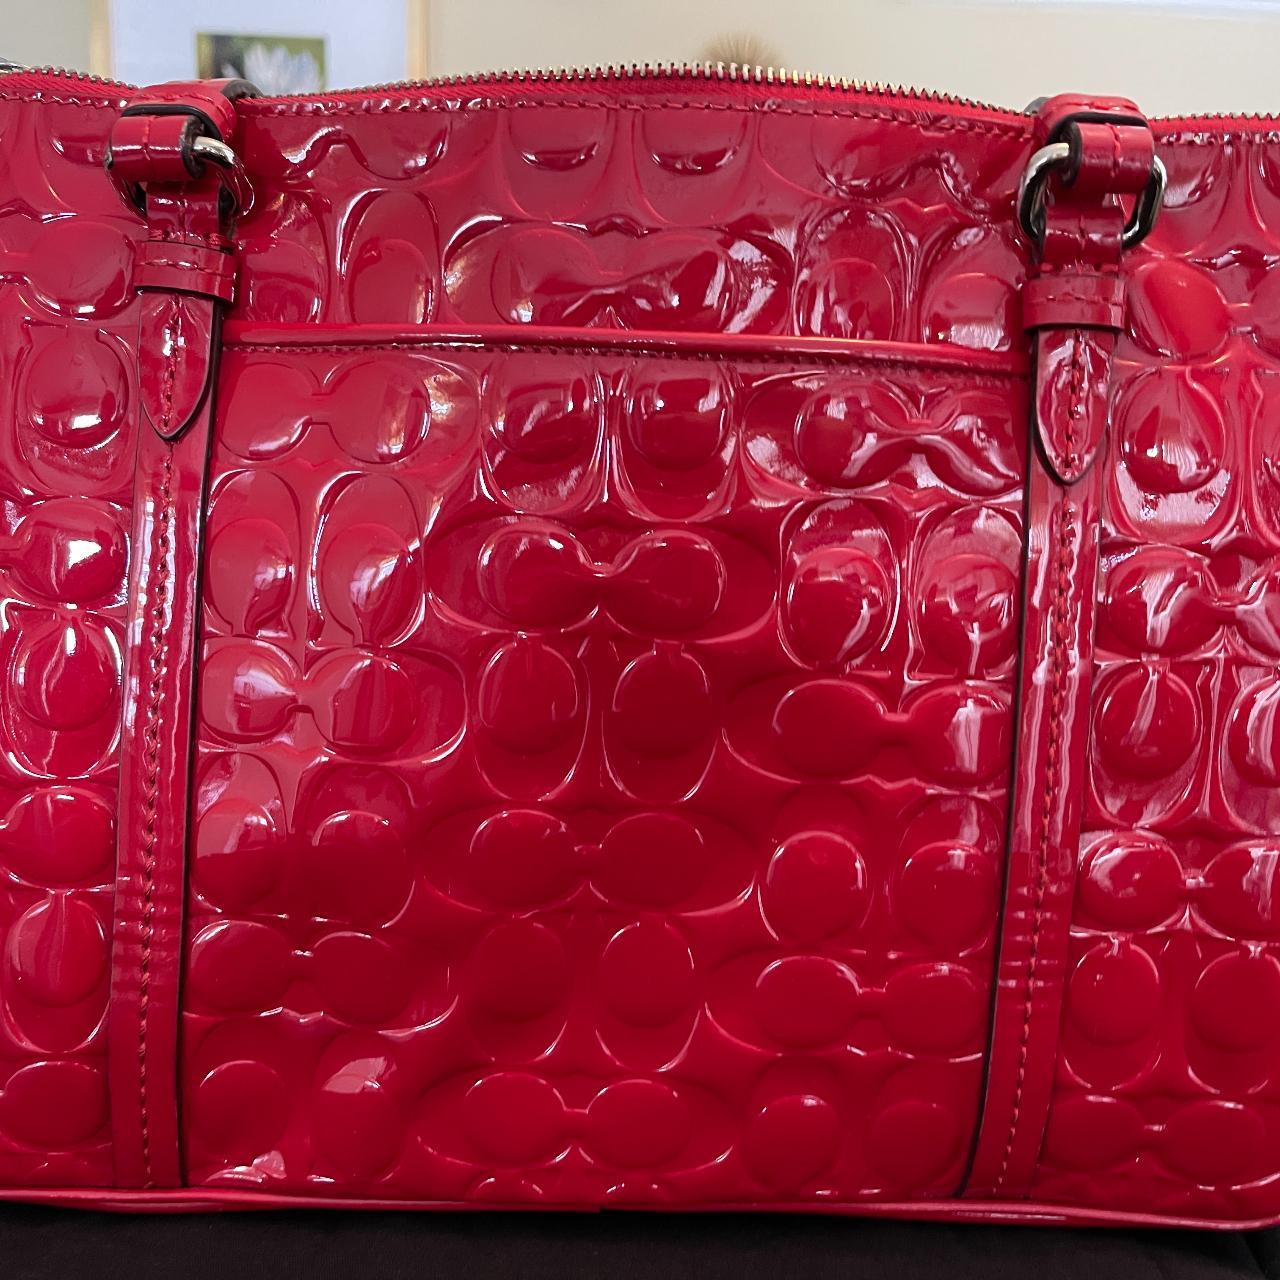 Coach | Bags | Red Leather Coach Bag | Poshmark